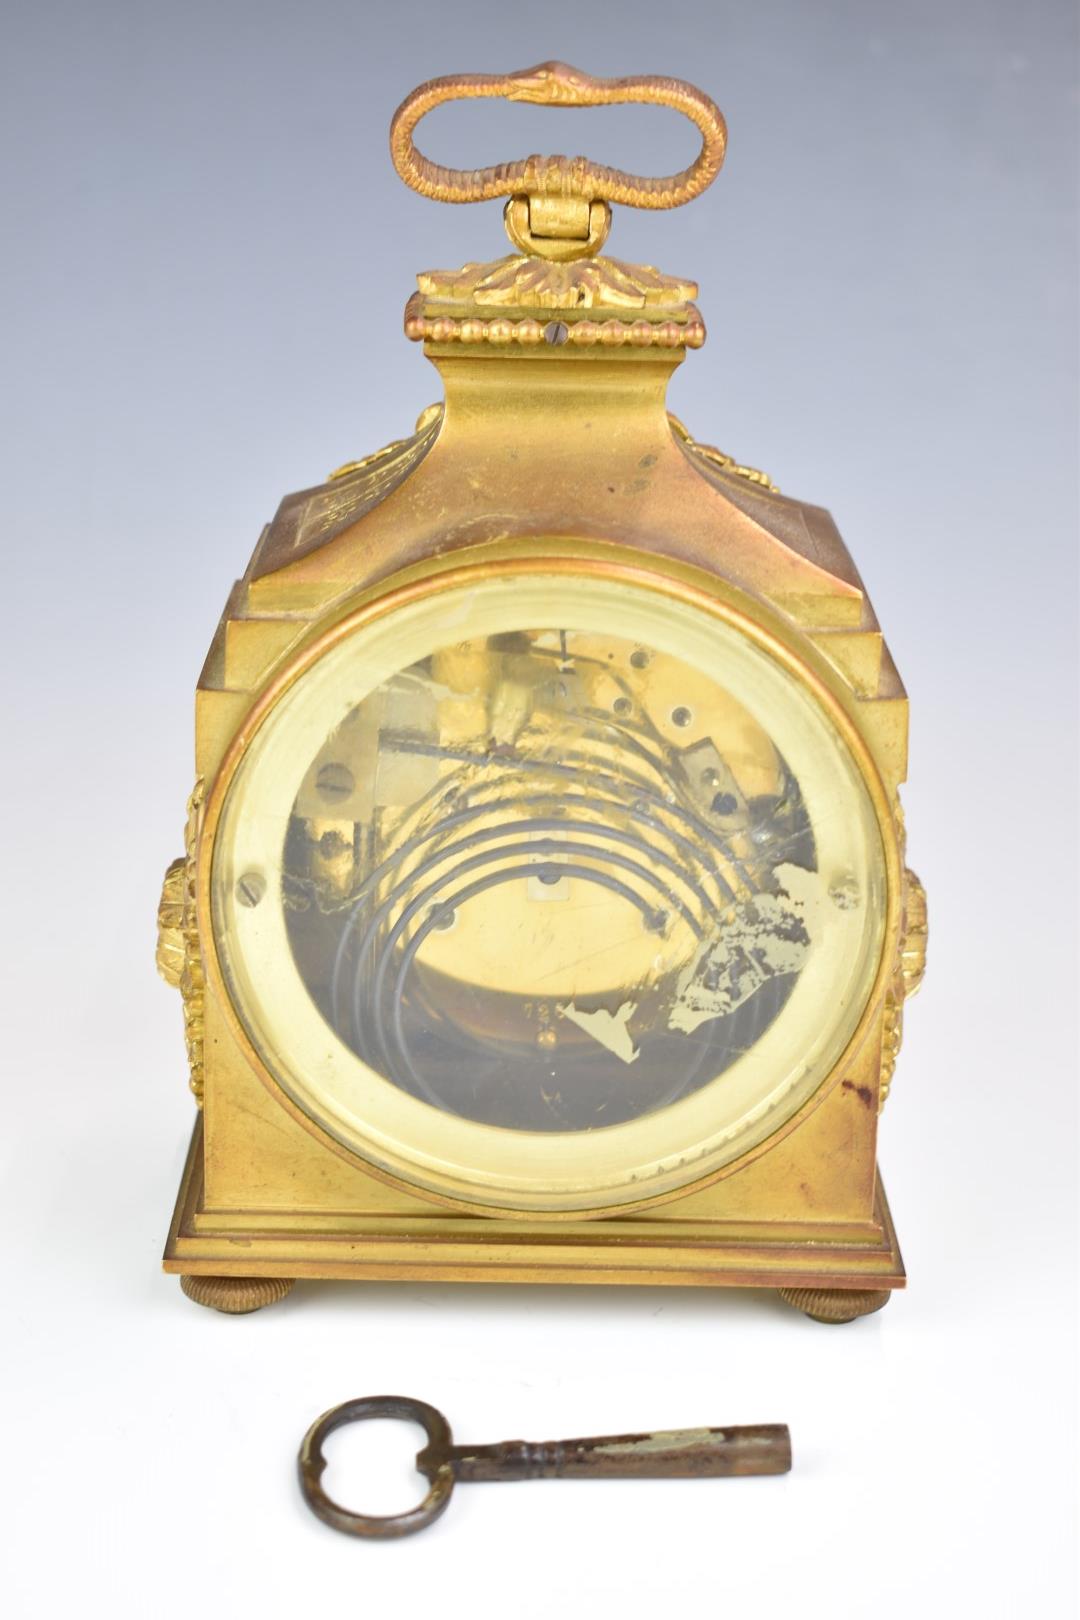 Gilt metal cased mantel or bracket clock with silvered dial, the French movement with platform - Image 7 of 11